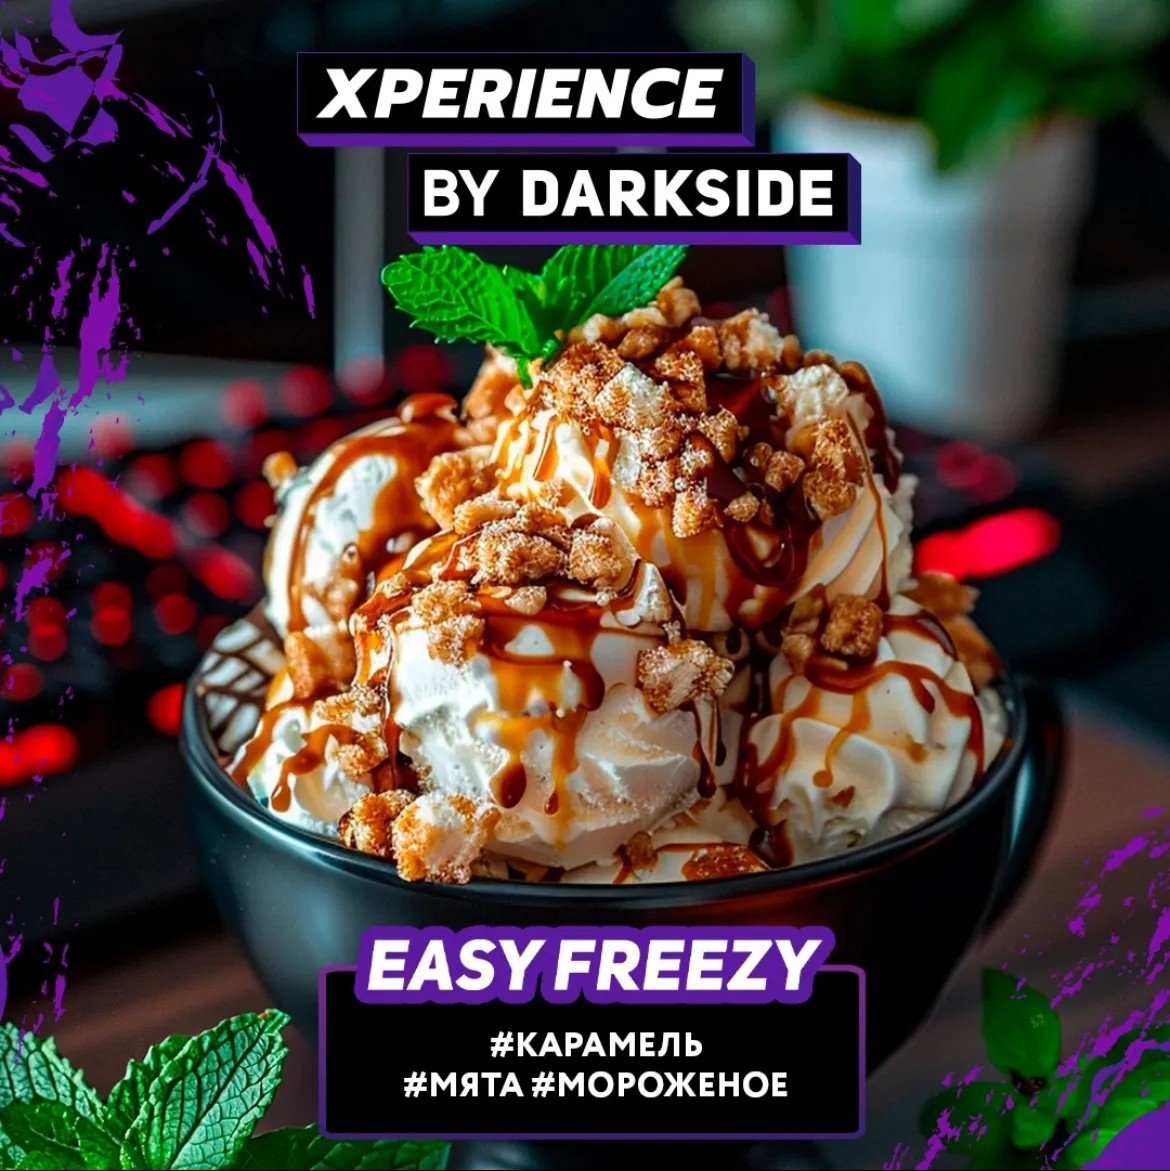 (M) Darkside Xperience 30 г Easy Freezy